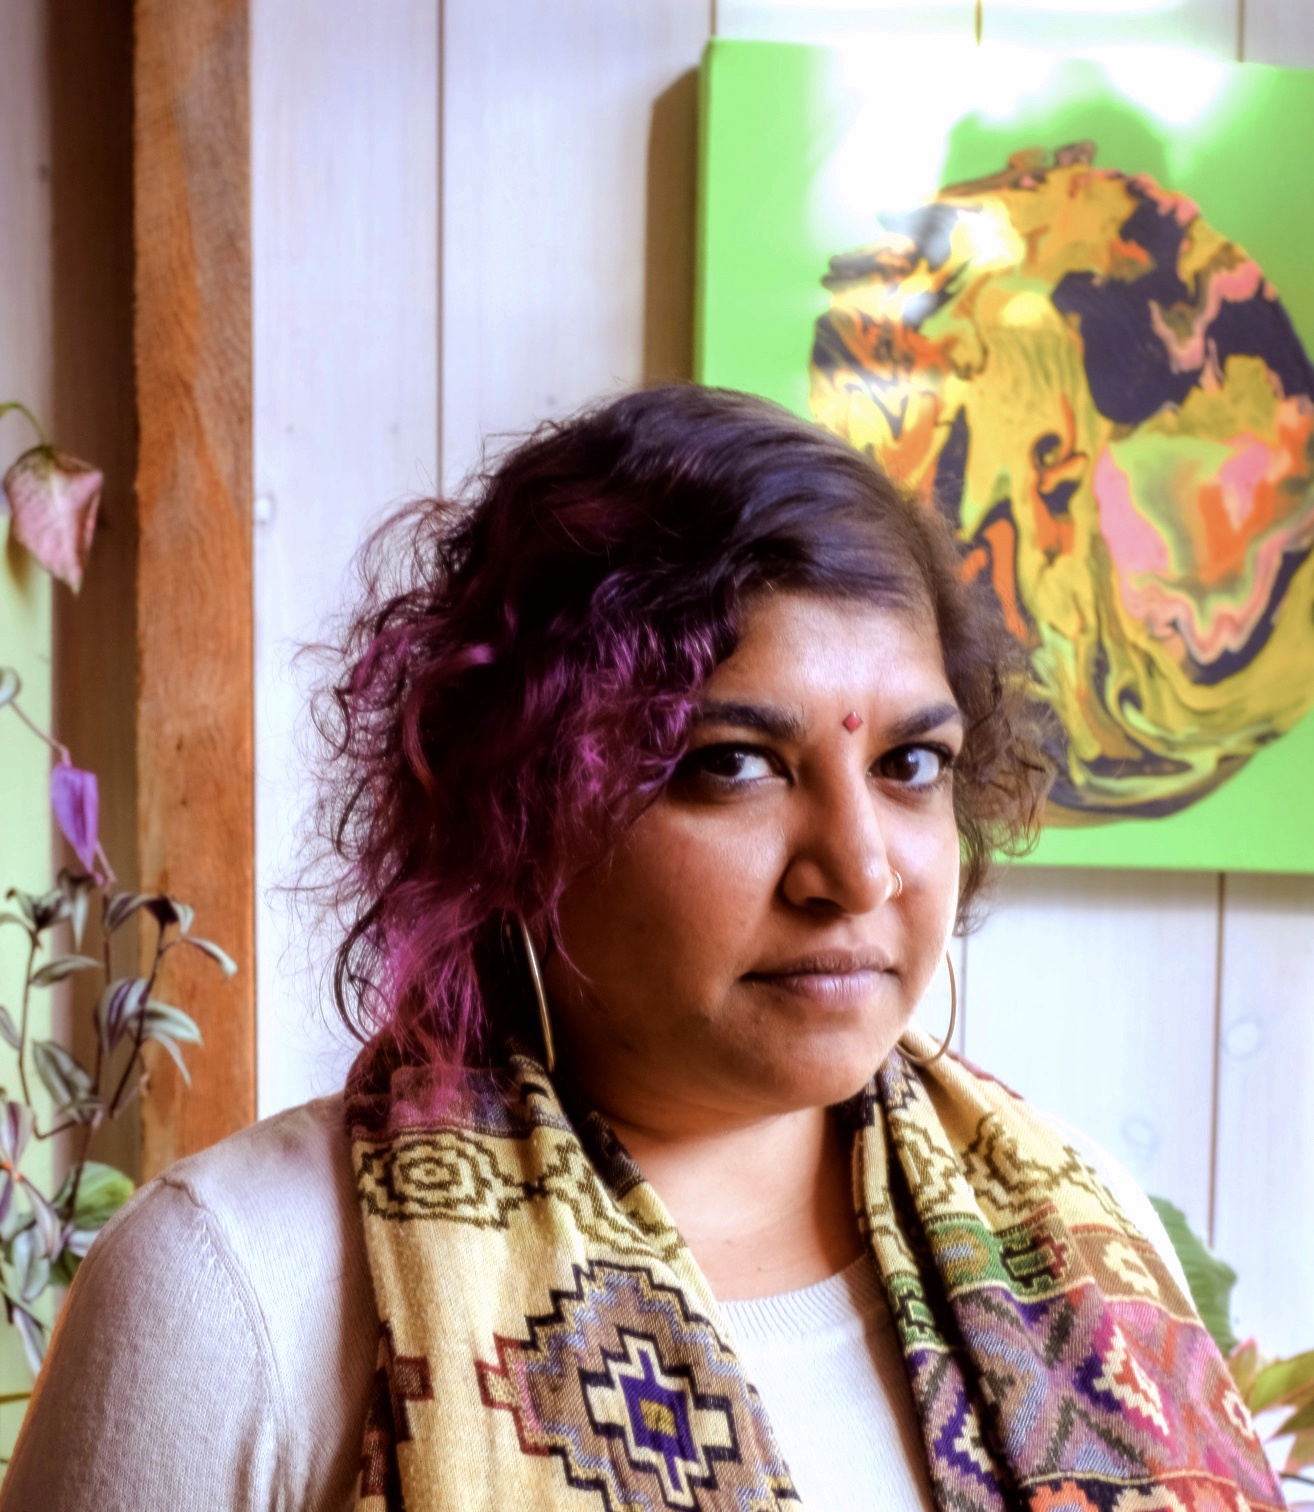 A photo of Sheetal Prajapati, who had pink highlights in her hair and wears a scarf around her neck. 